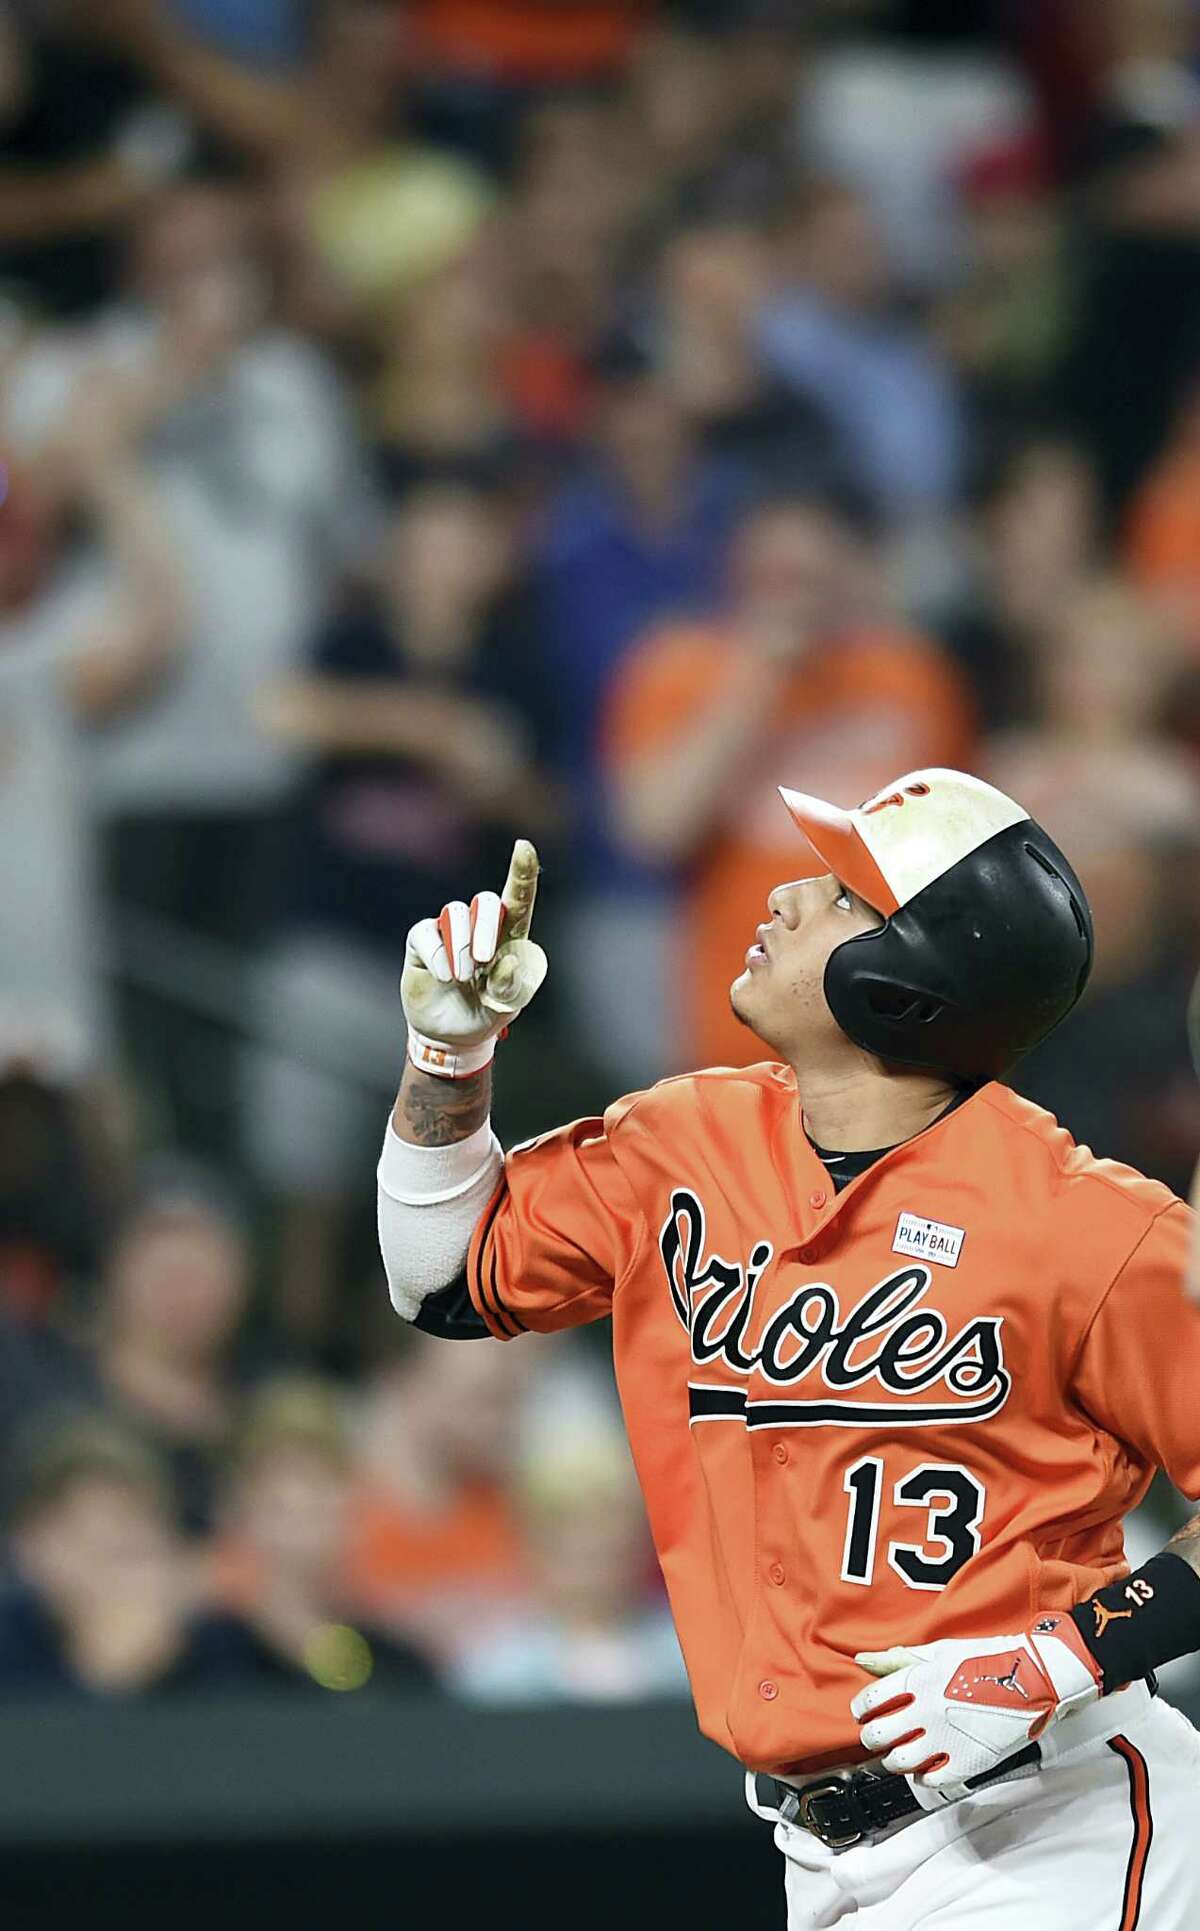 Baltimore Orioles’ Manny Machado reacts after hitting a solo home run against the Boston Red Sox in a baseball game on June 3, 2017 in Baltimore.